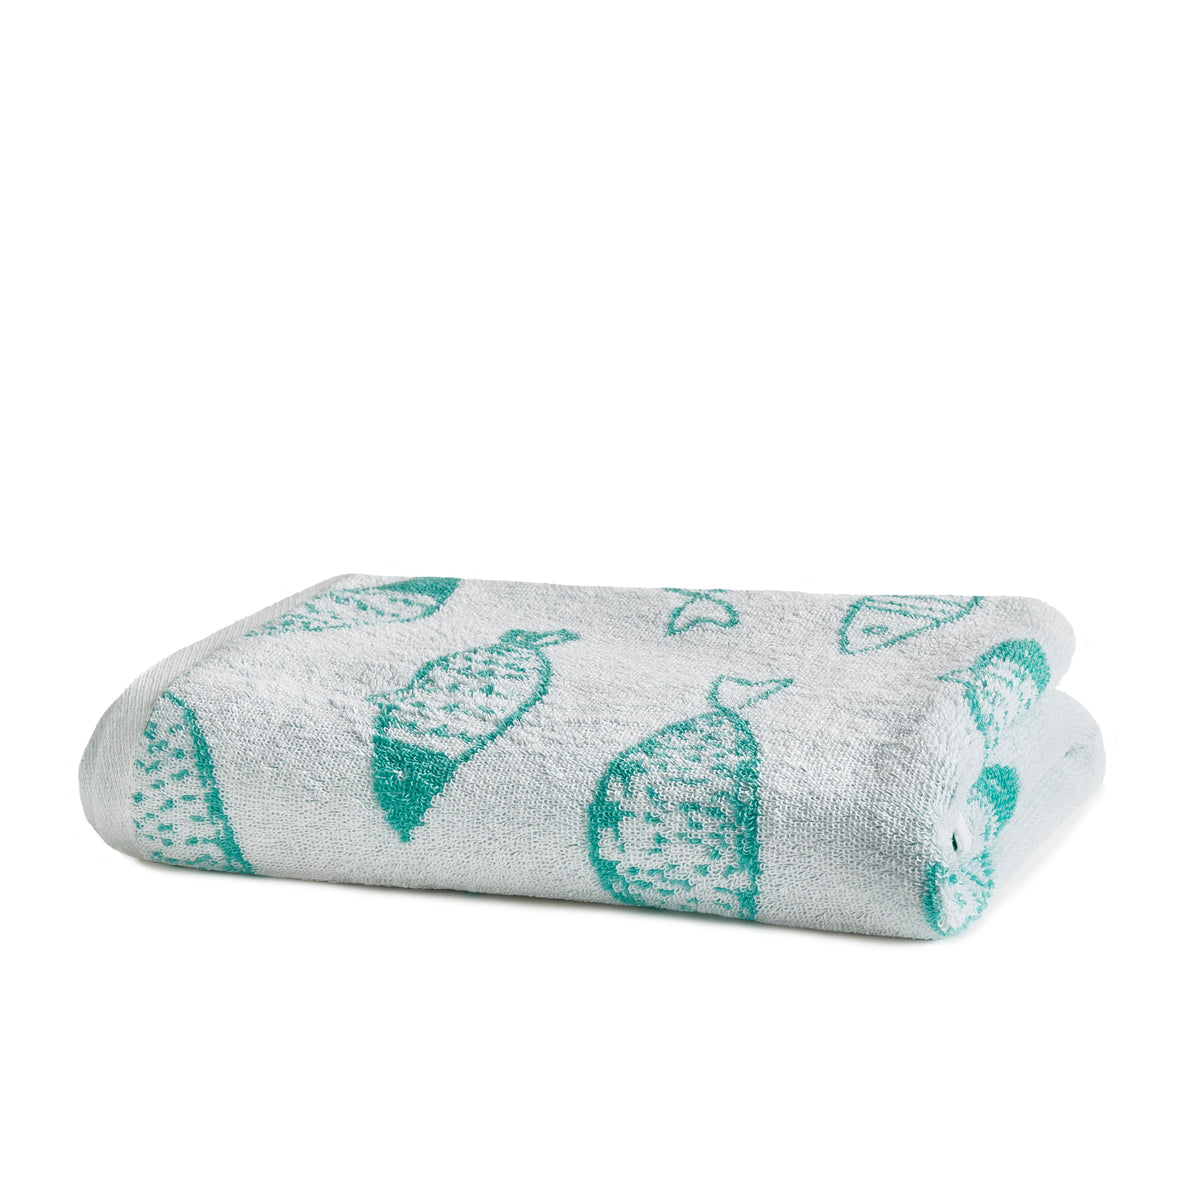 Fish Hand Towel (2 pack) by Fusion Bathroom in Aqua/White 50 x 90cm –  Ulster Weavers